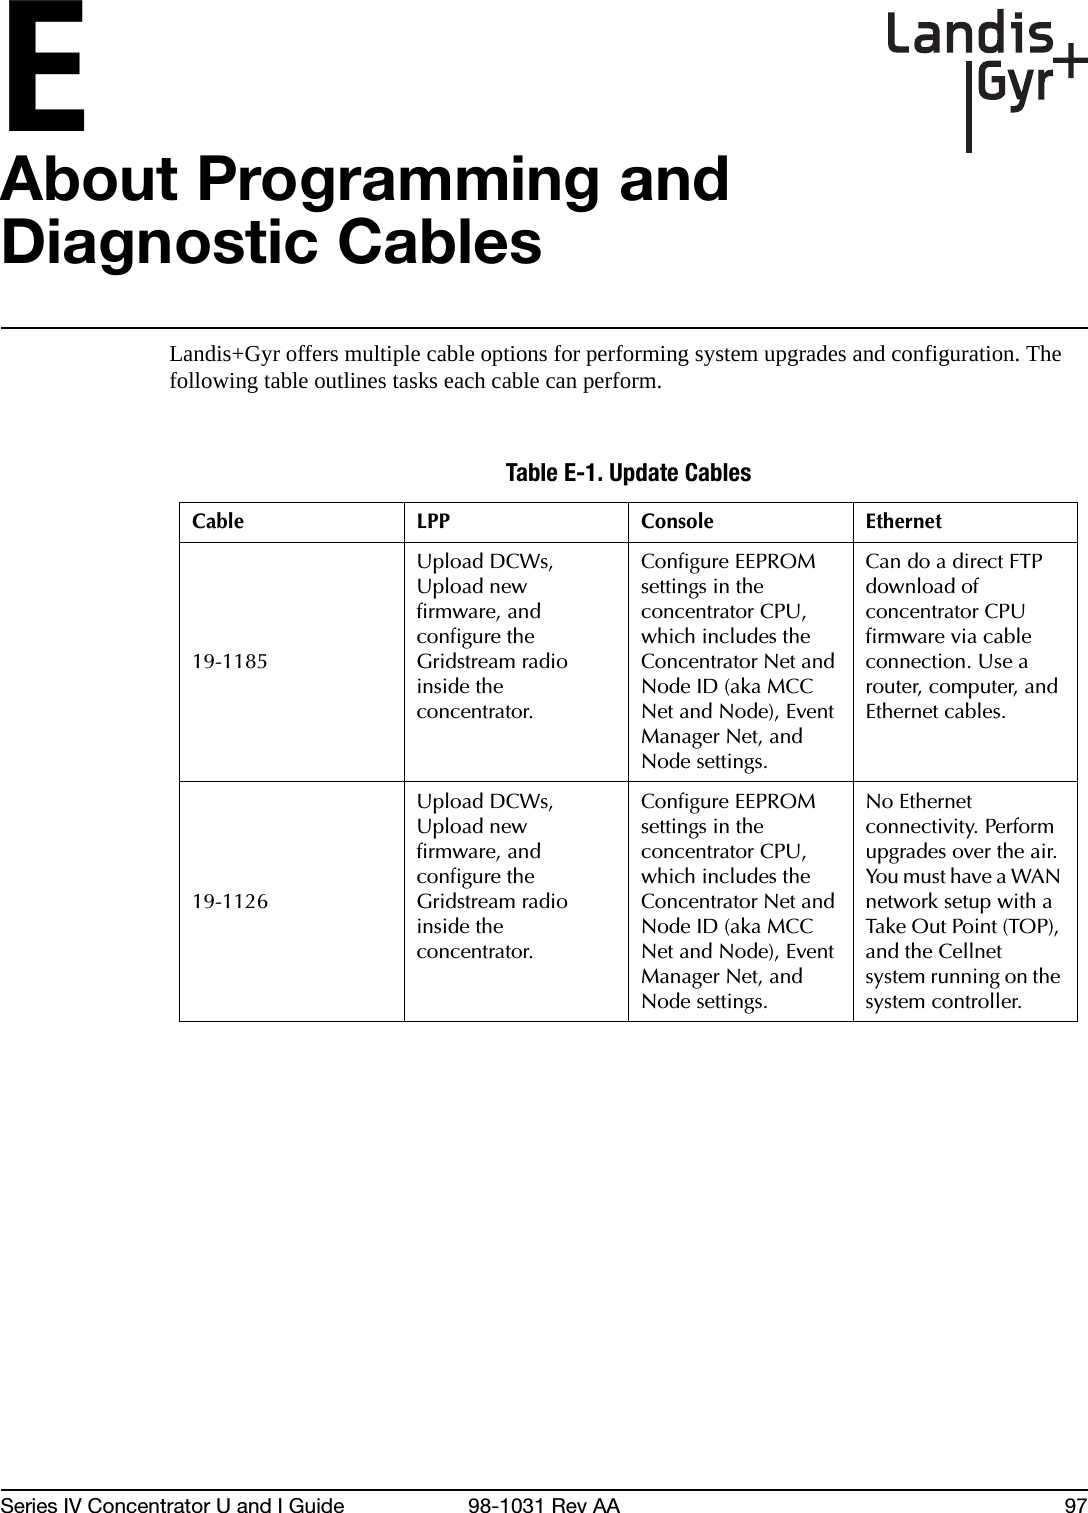 ESeries IV Concentrator U and I Guide 98-1031 Rev AA 97About Programming and Diagnostic CablesLandis+Gyr offers multiple cable options for performing system upgrades and configuration. The following table outlines tasks each cable can perform.Table E-1. Update CablesCable LPP Console Ethernet19-1185Upload DCWs, Upload new firmware, and configure the Gridstream radio inside the concentrator.Configure EEPROM settings in the concentrator CPU, which includes the Concentrator Net and Node ID (aka MCC Net and Node), Event Manager Net, and Node settings.Can do a direct FTP download of concentrator CPU firmware via cable connection. Use a router, computer, and Ethernet cables.19-1126Upload DCWs, Upload new firmware, and configure the Gridstream radio inside the concentrator.Configure EEPROM settings in the concentrator CPU, which includes the Concentrator Net and Node ID (aka MCC Net and Node), Event Manager Net, and Node settings.No Ethernet connectivity. Perform upgrades over the air. You must have a WAN network setup with a Take Out Point (TOP), and the Cellnet system running on the system controller.